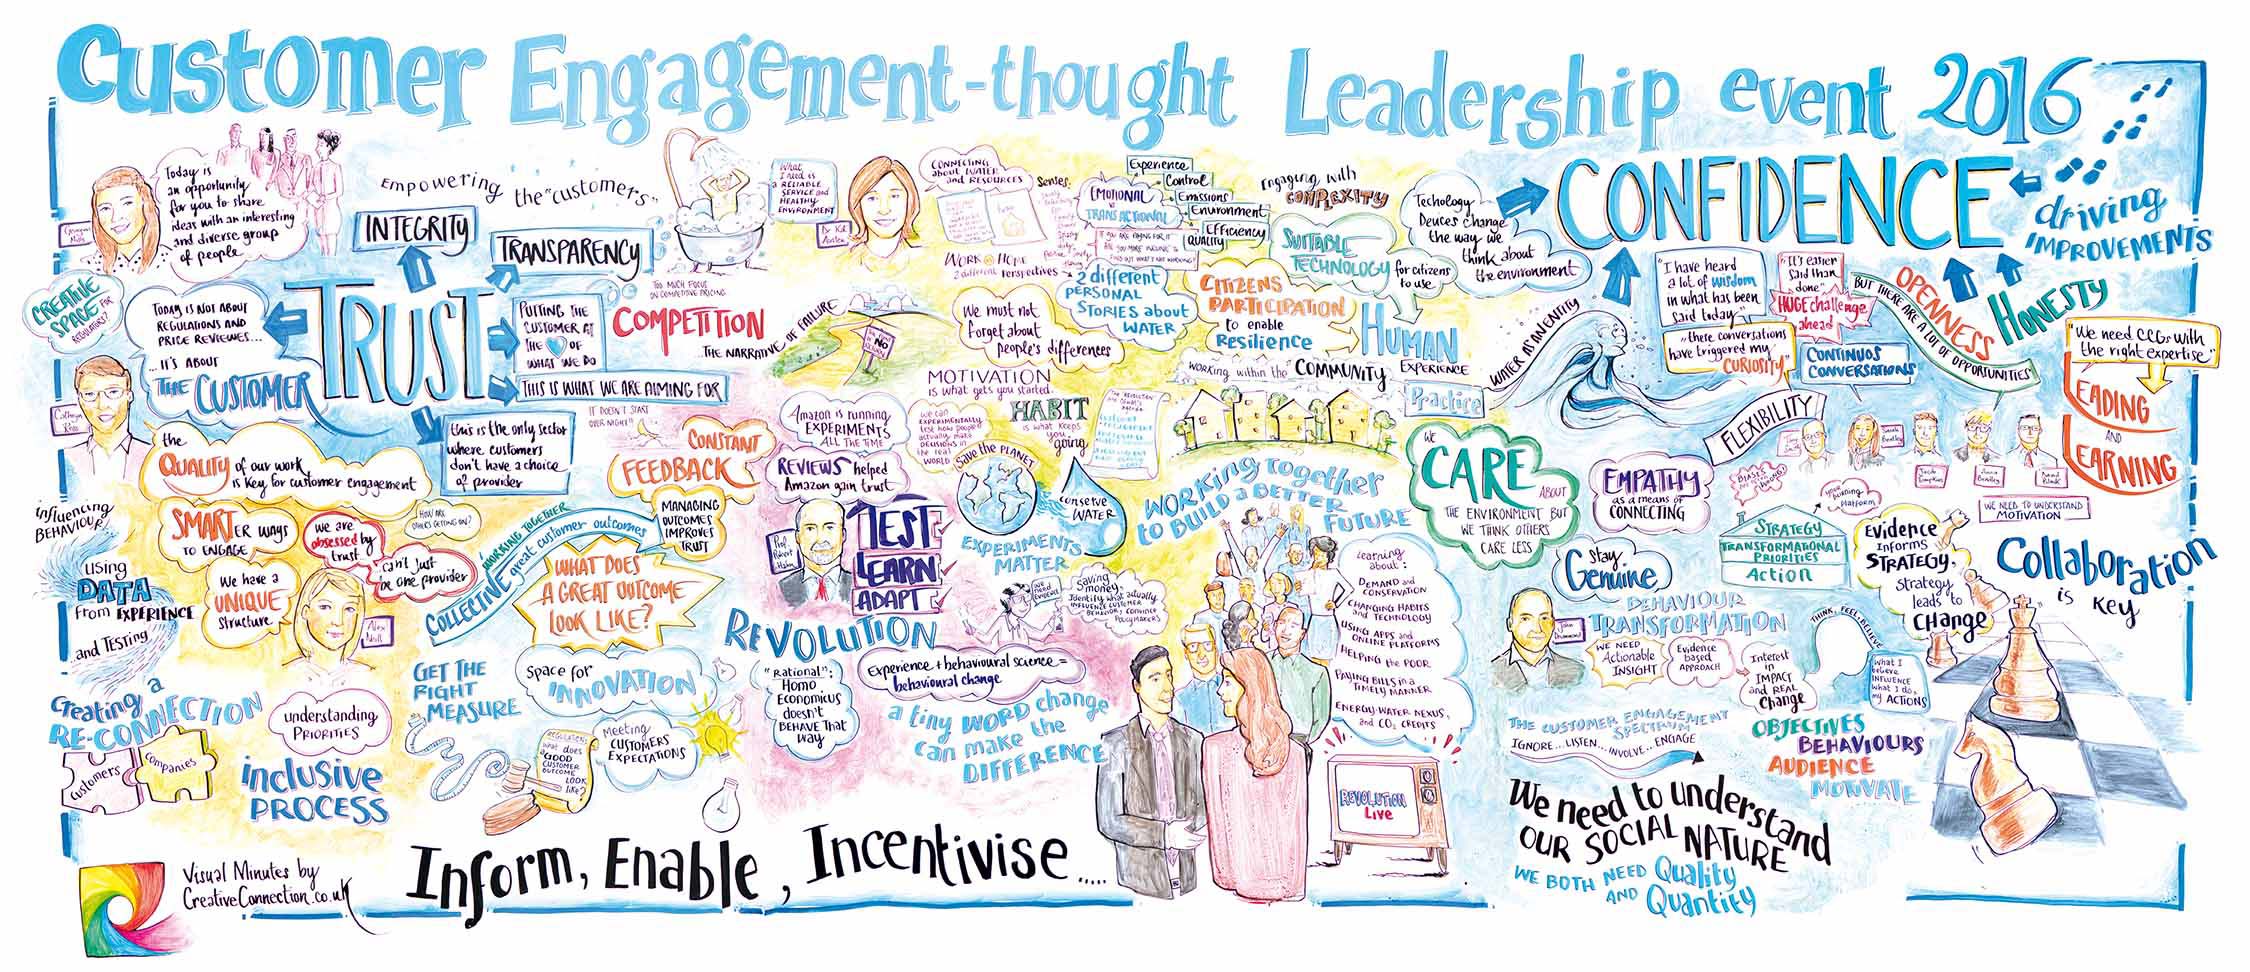 Ofwat Thought Leadership Visual Minutes